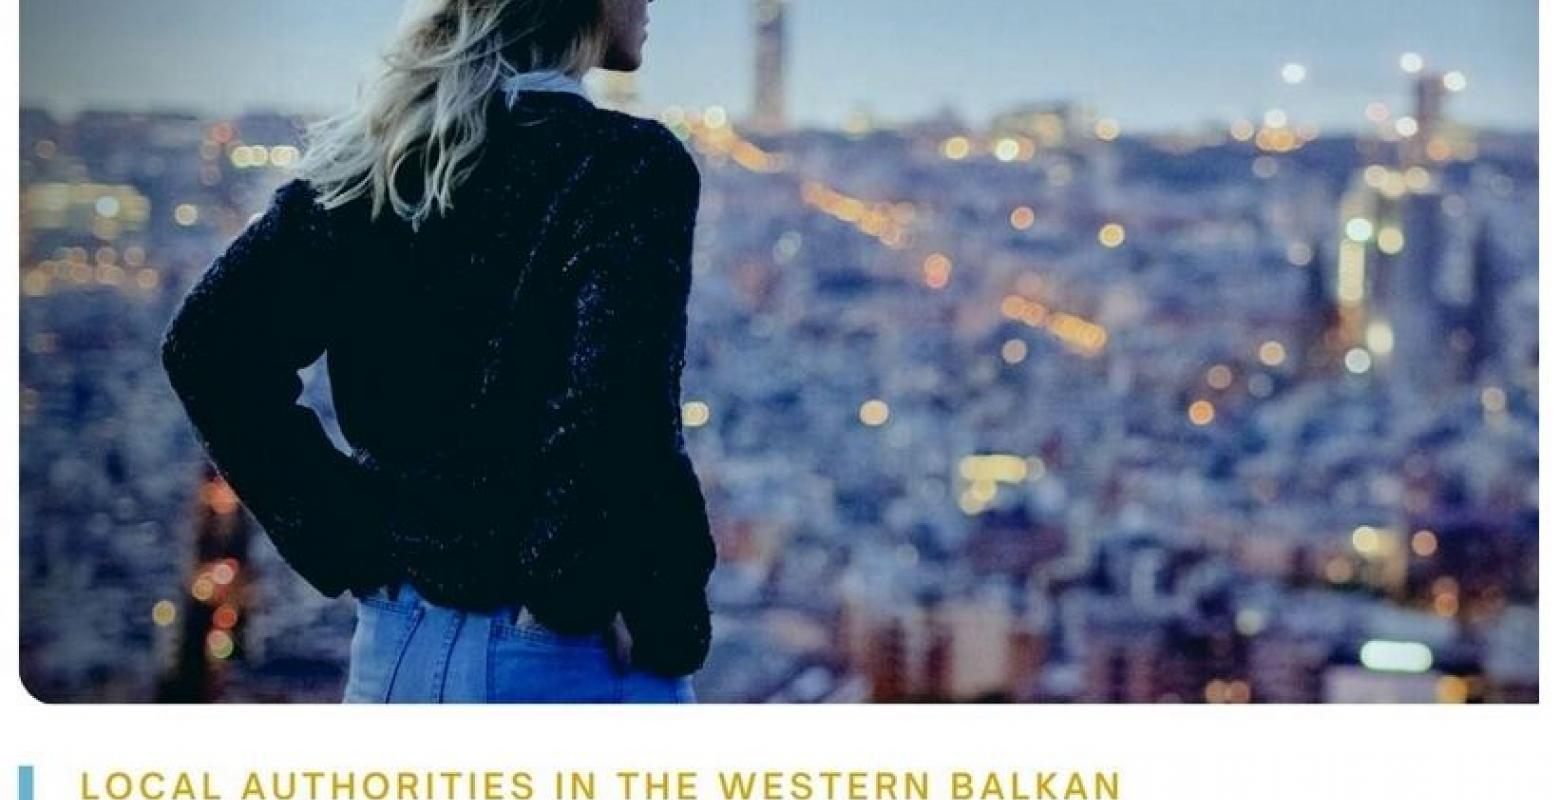 Local authorities in the Western Balkan and their vision of a future Europe